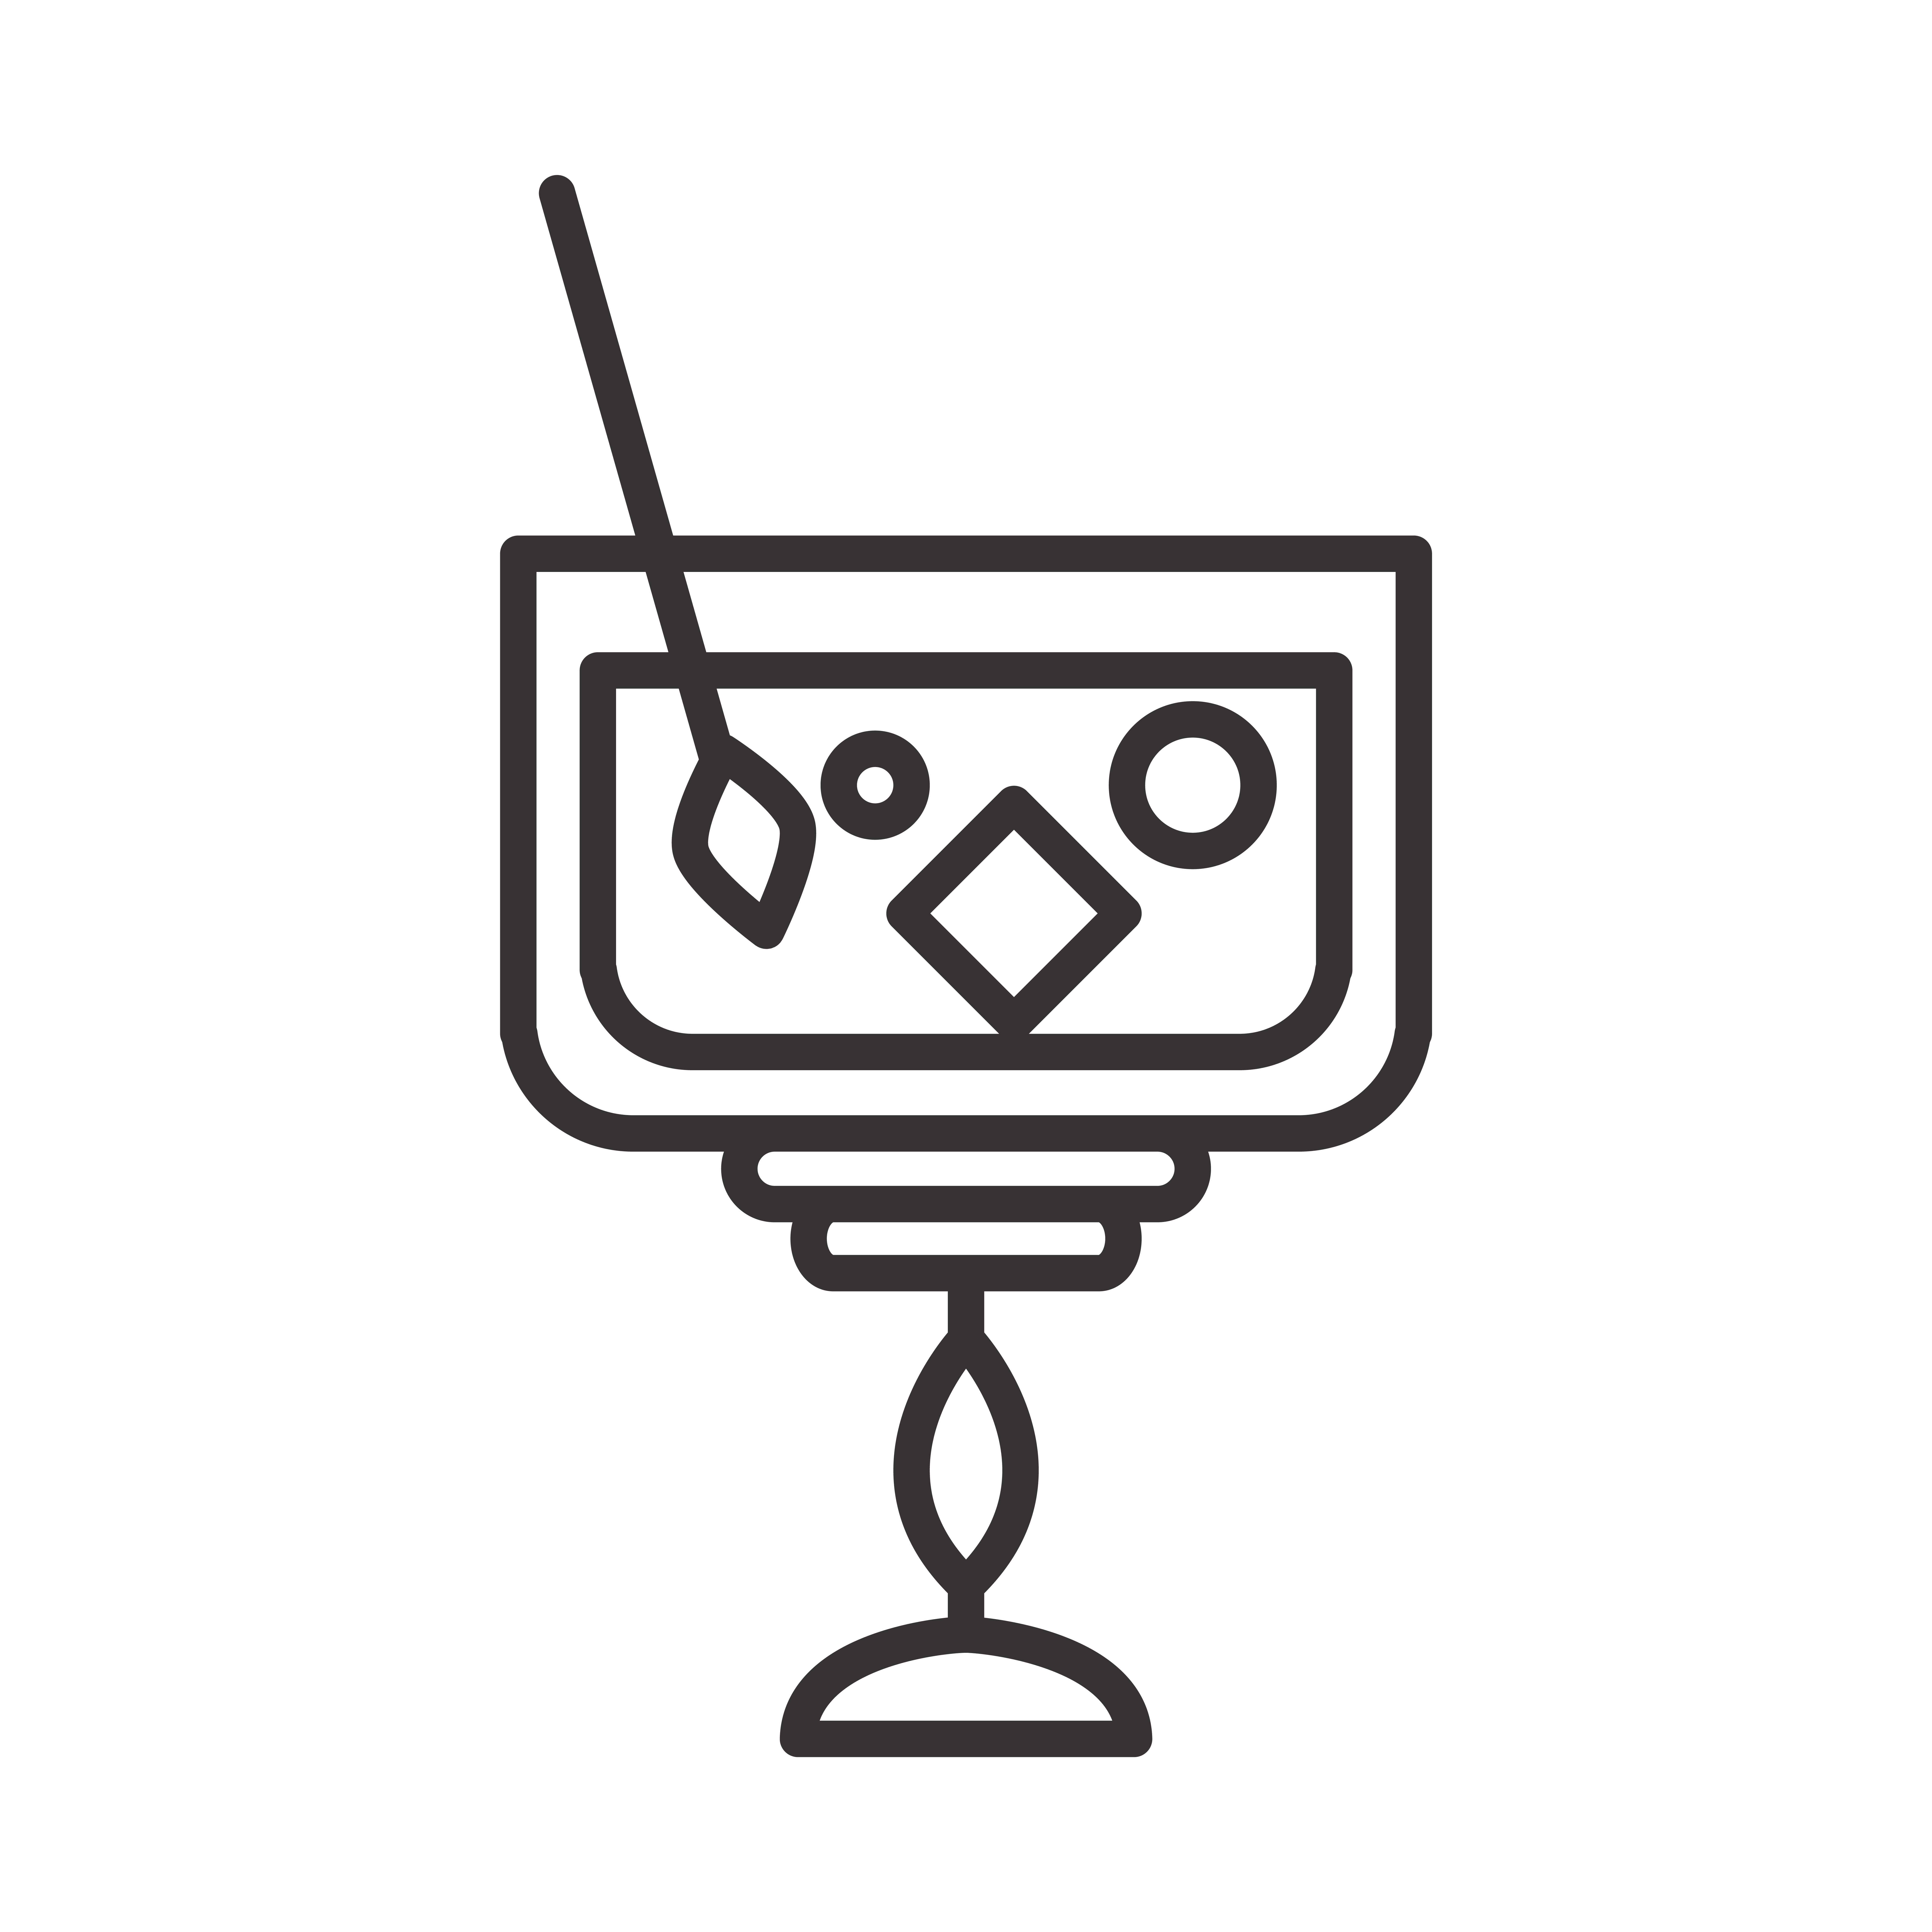 https://static.vecteezy.com/system/resources/previews/002/608/146/original/cocktail-icon-glass-ice-cube-cherry-and-mixer-drink-liquor-refreshing-alcohol-line-style-design-free-vector.jpg